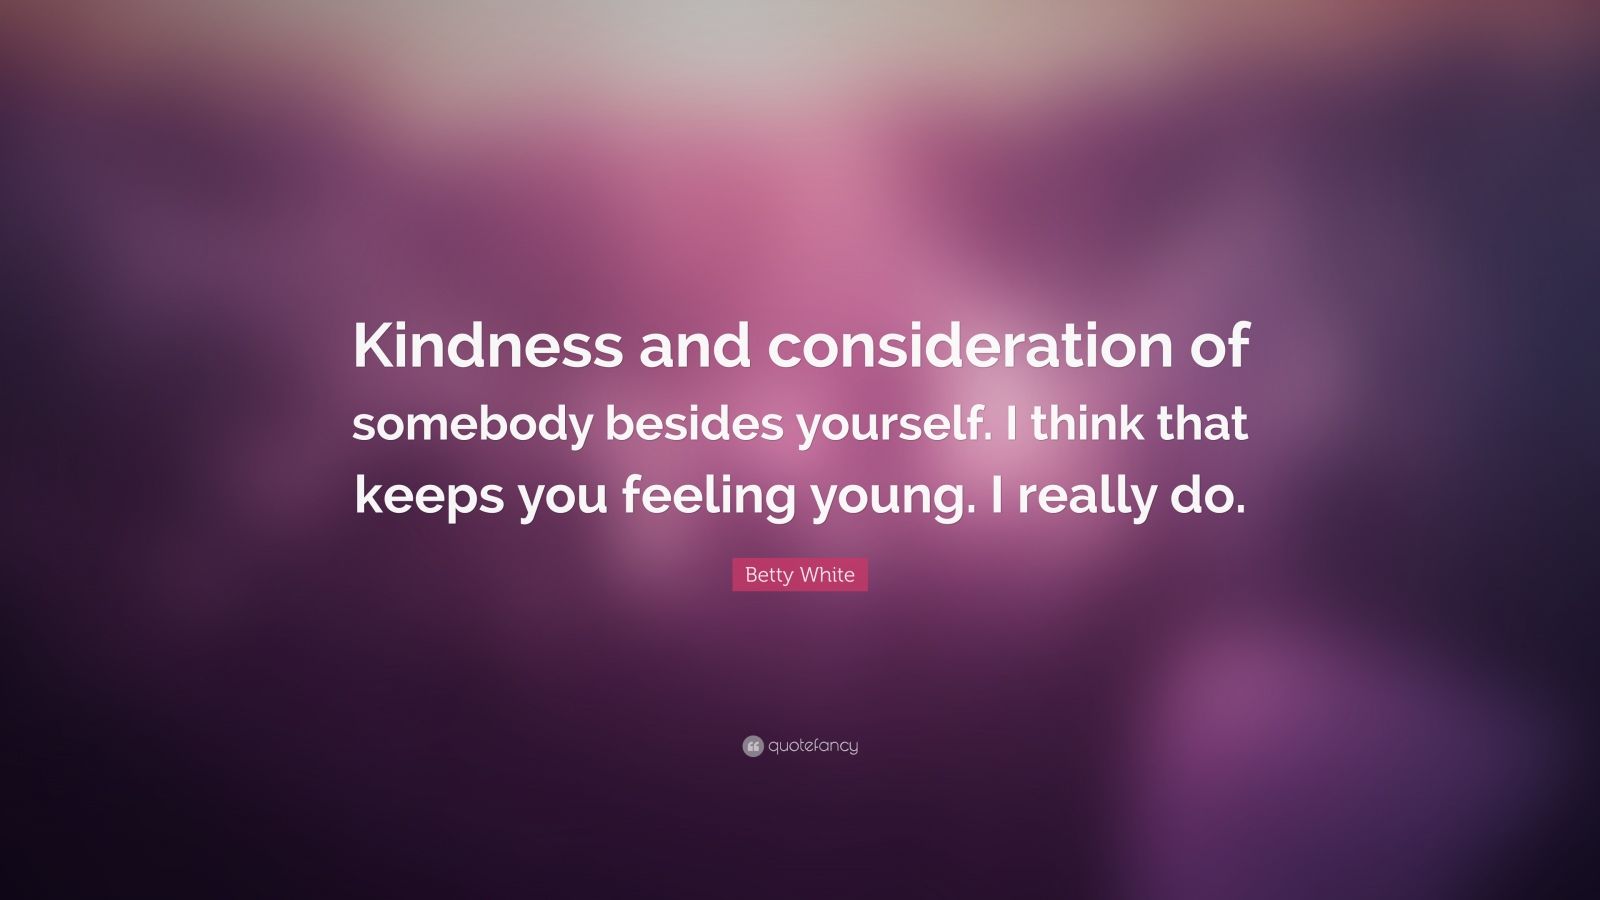 Betty White Quote: “Kindness and consideration of somebody besides ...